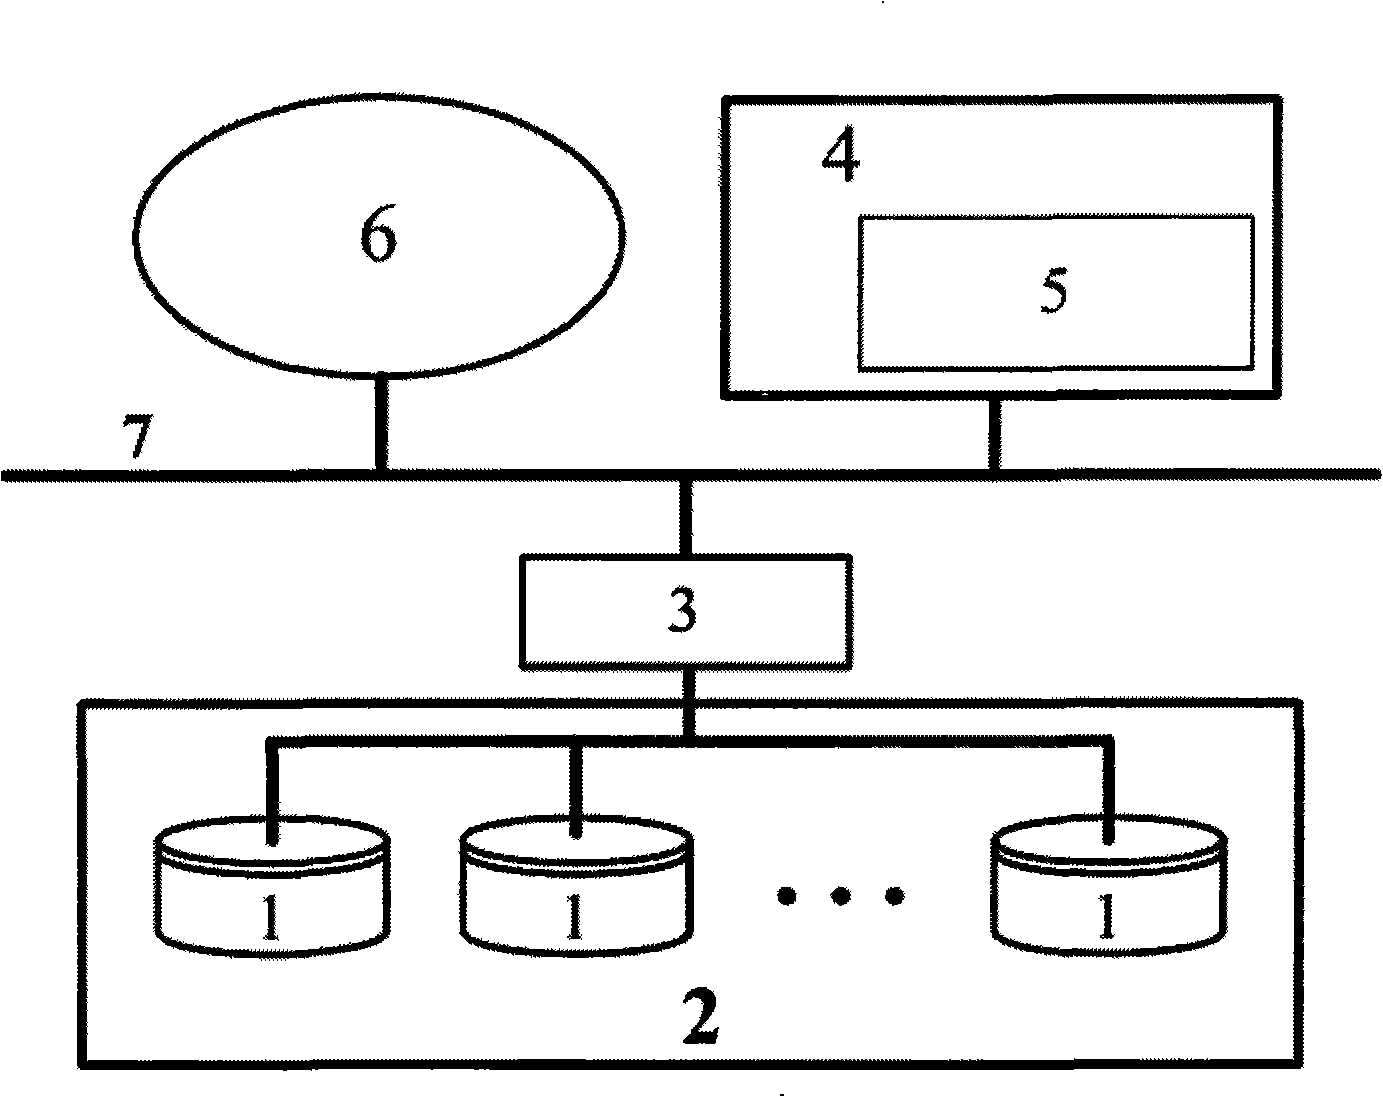 Method for updating double-magnetic head user data of large scale fault-tolerant magnetic disk array storage system